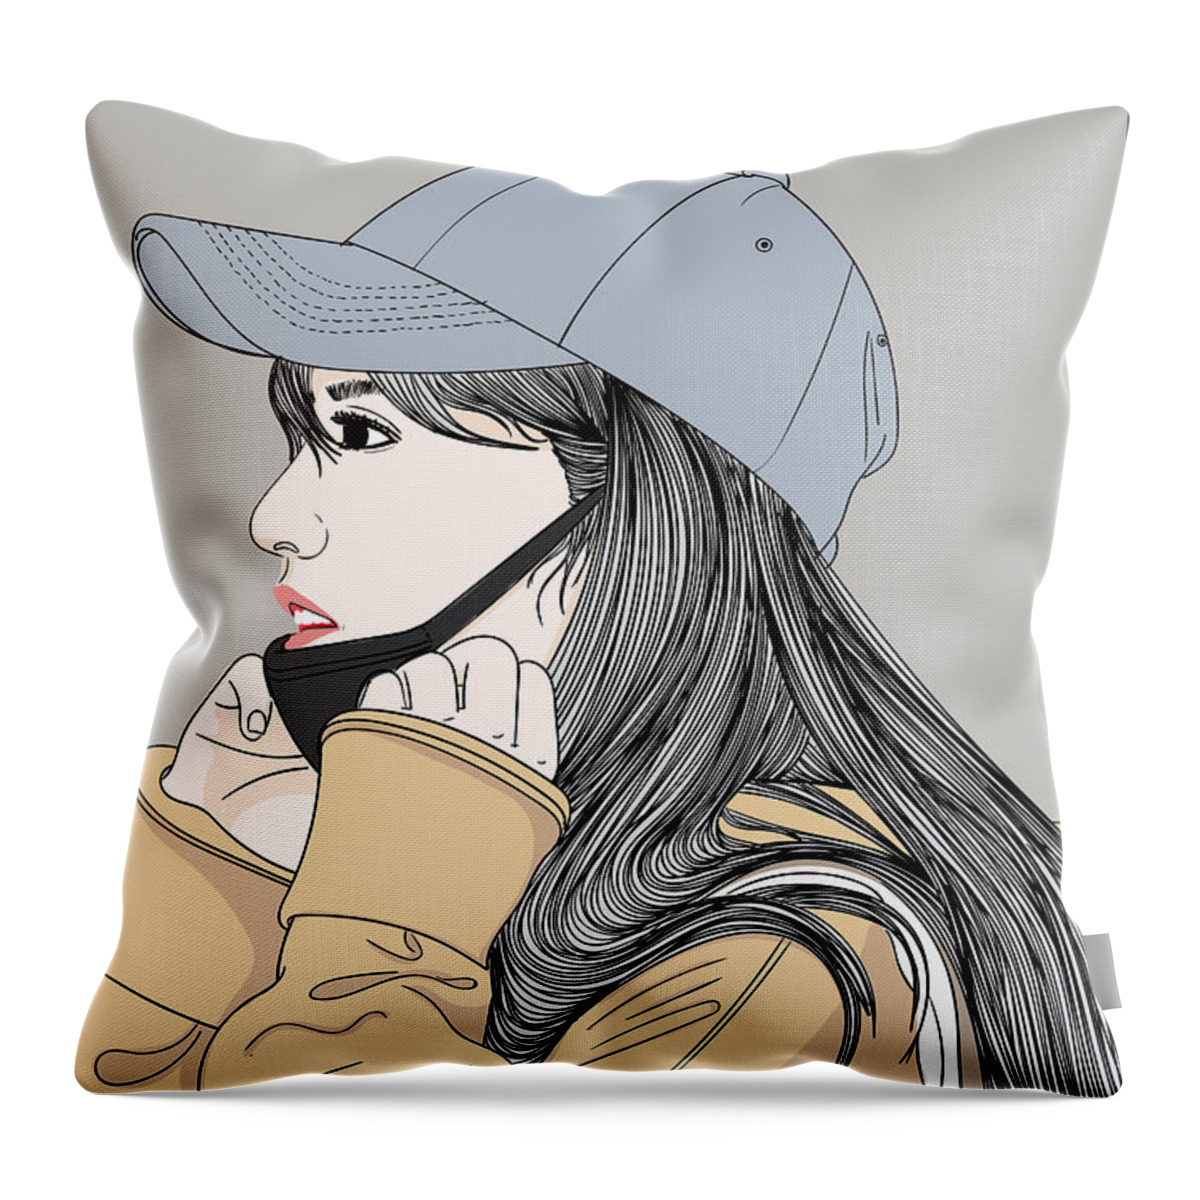 Graphic Throw Pillow featuring the digital art Fashion Girl Wearing A Face Mask - Line Art Graphic Illustration Artwork by Sambel Pedes